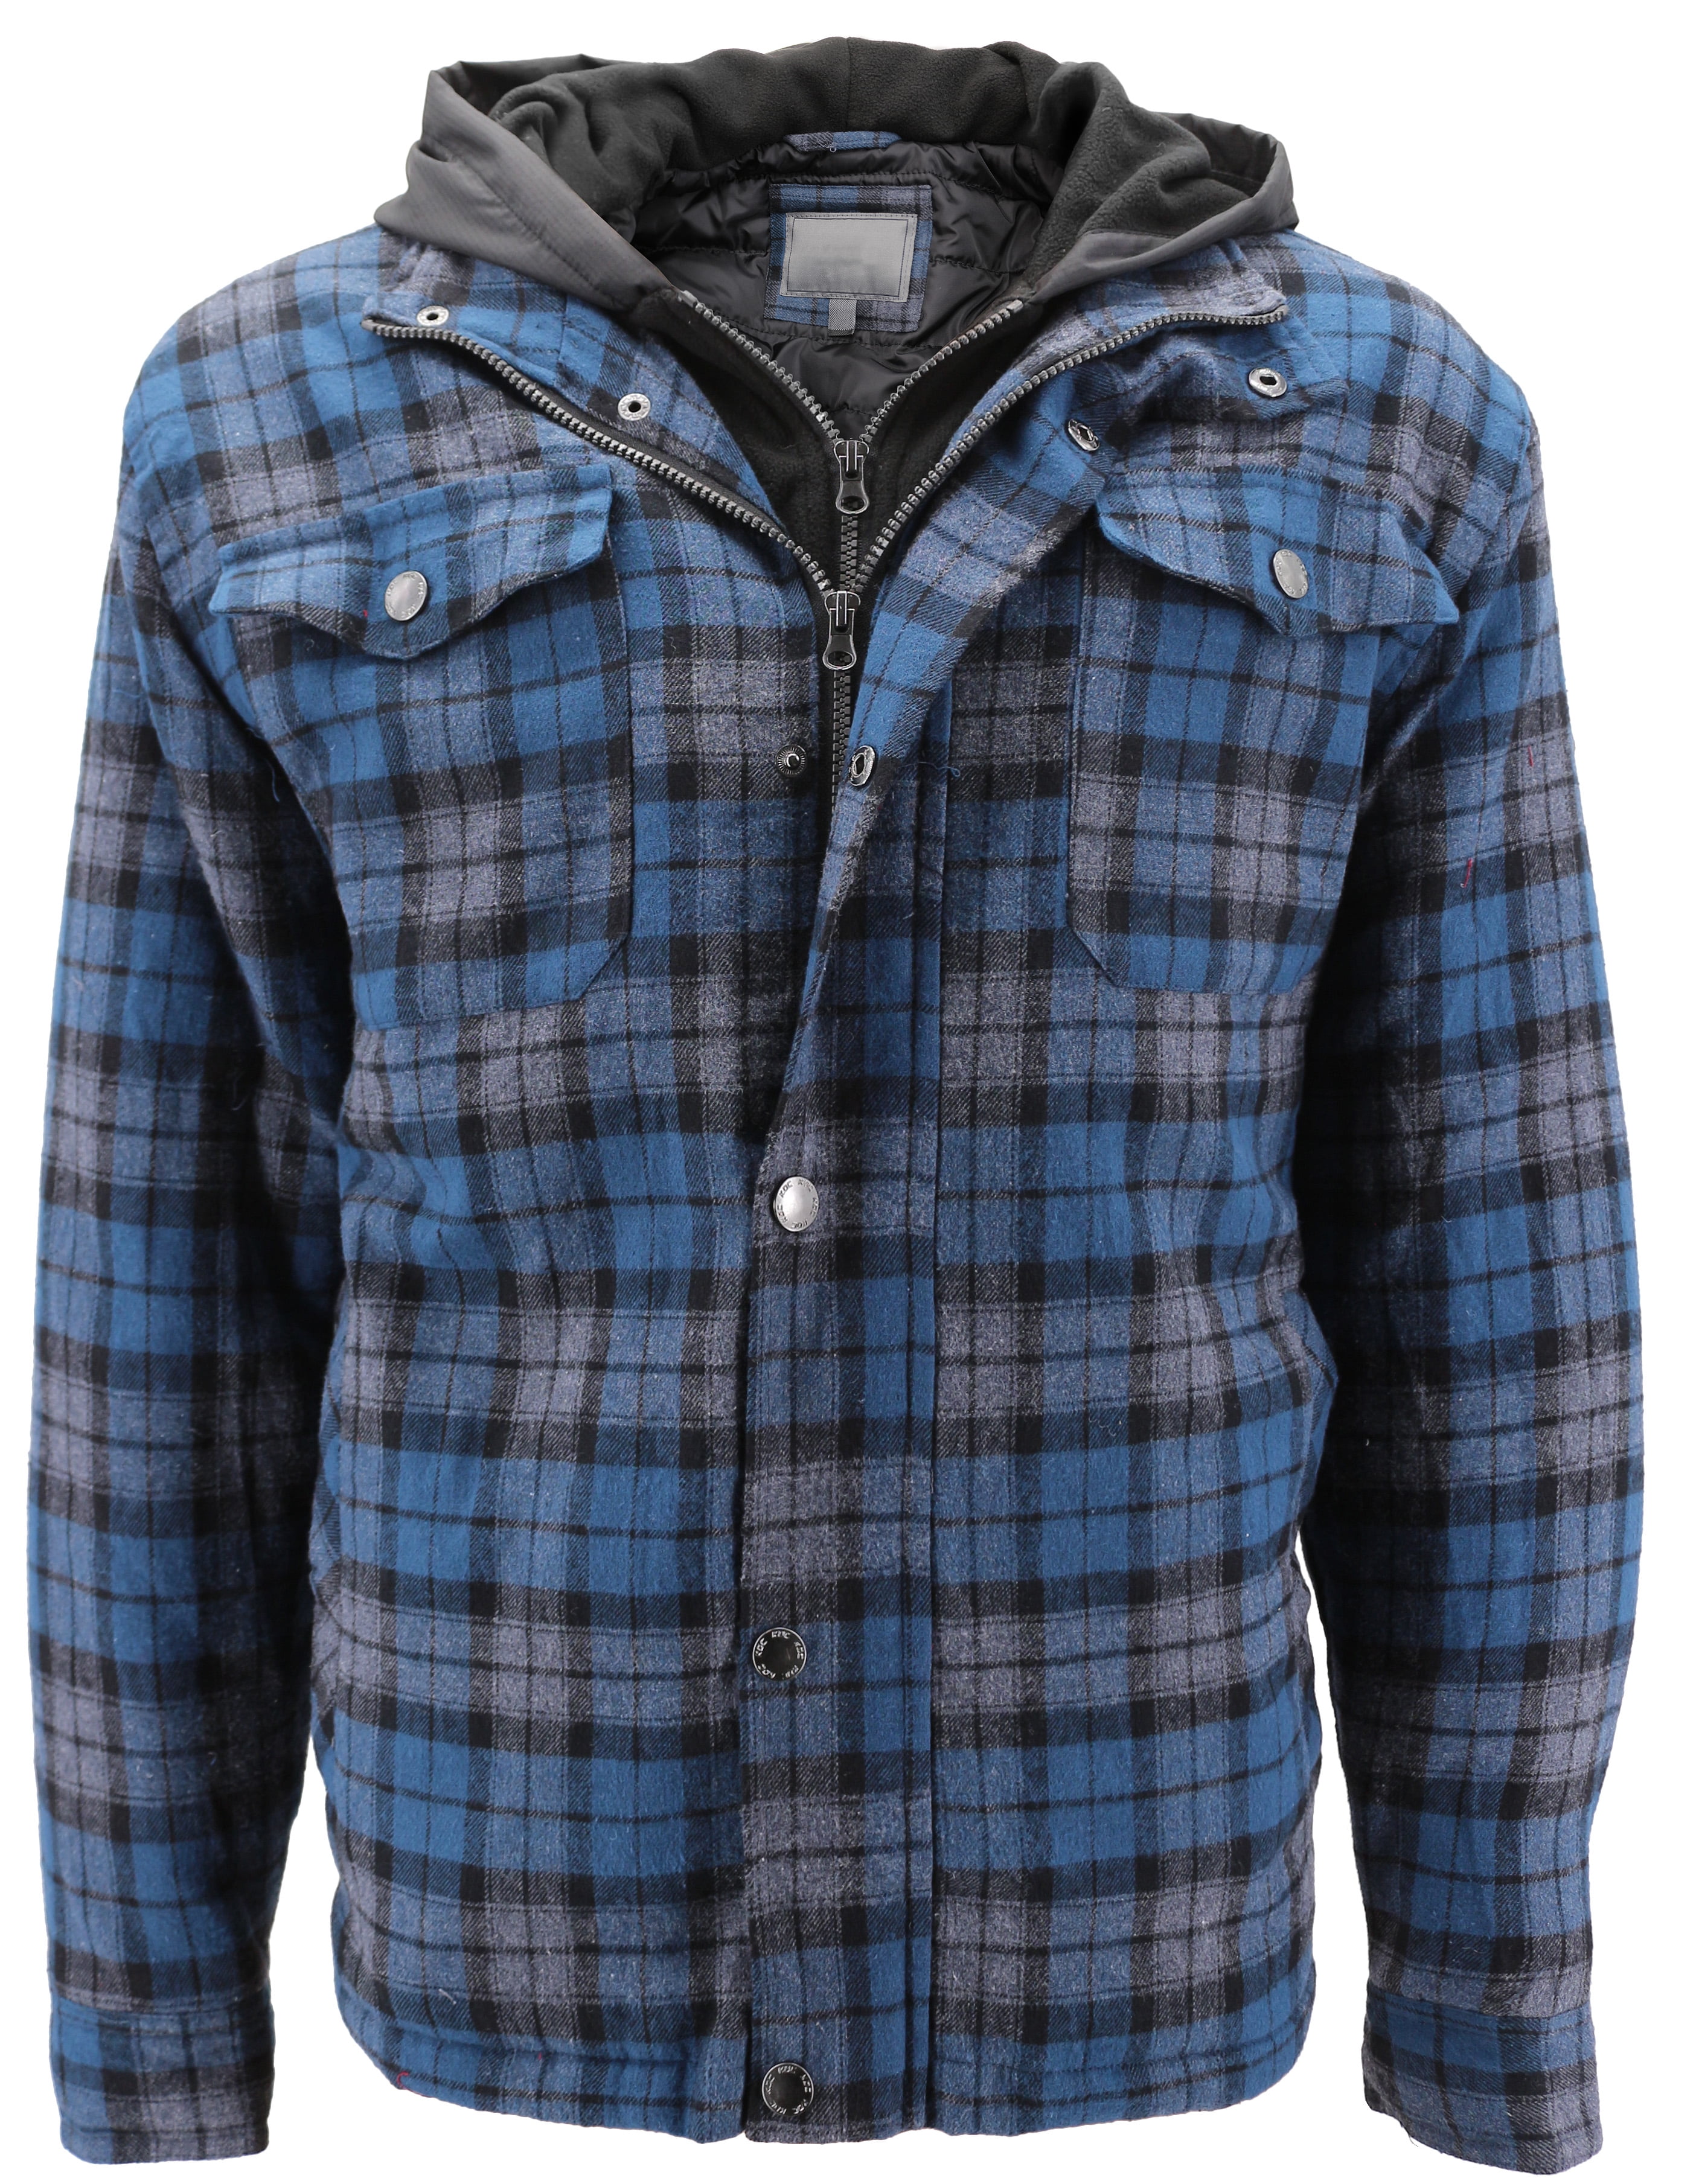 vkwear Men's Quilted Lined Cotton Plaid Flannel Layered Hoodie Jacket ...